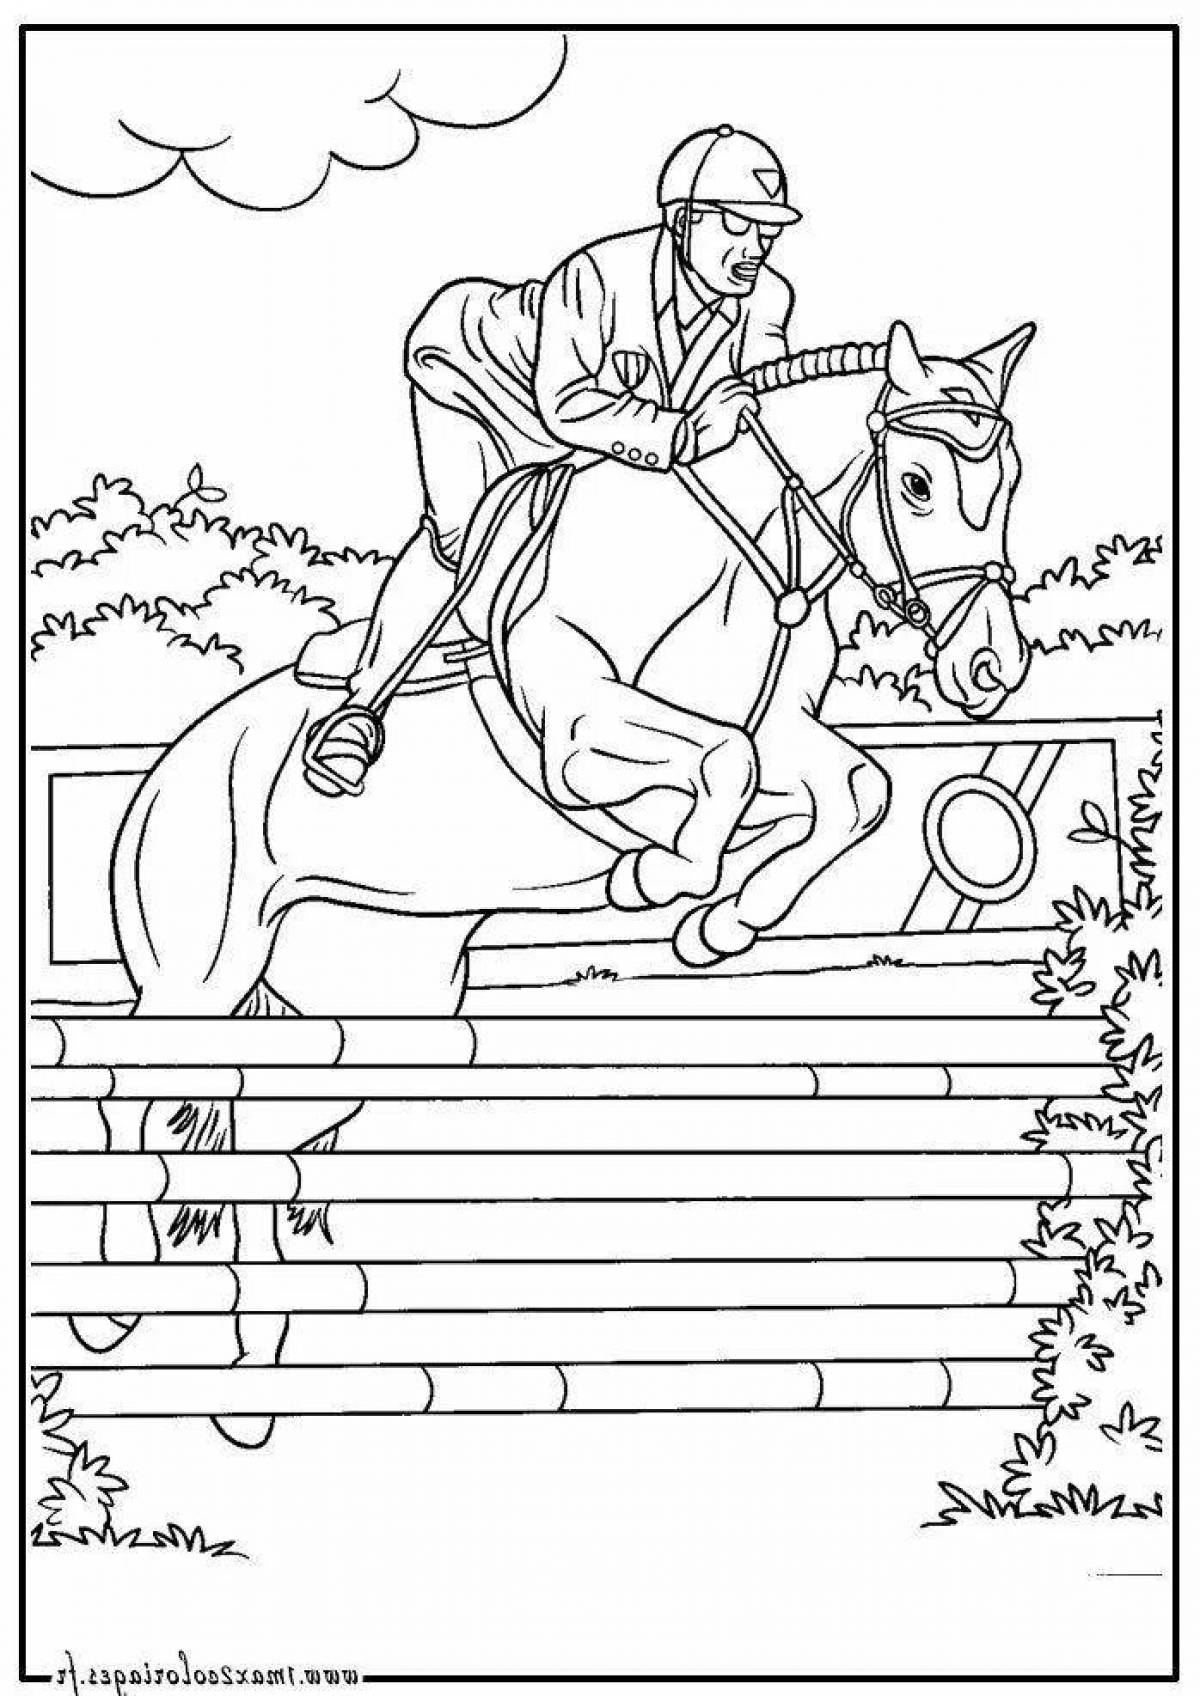 Radiant show jumping horse coloring page